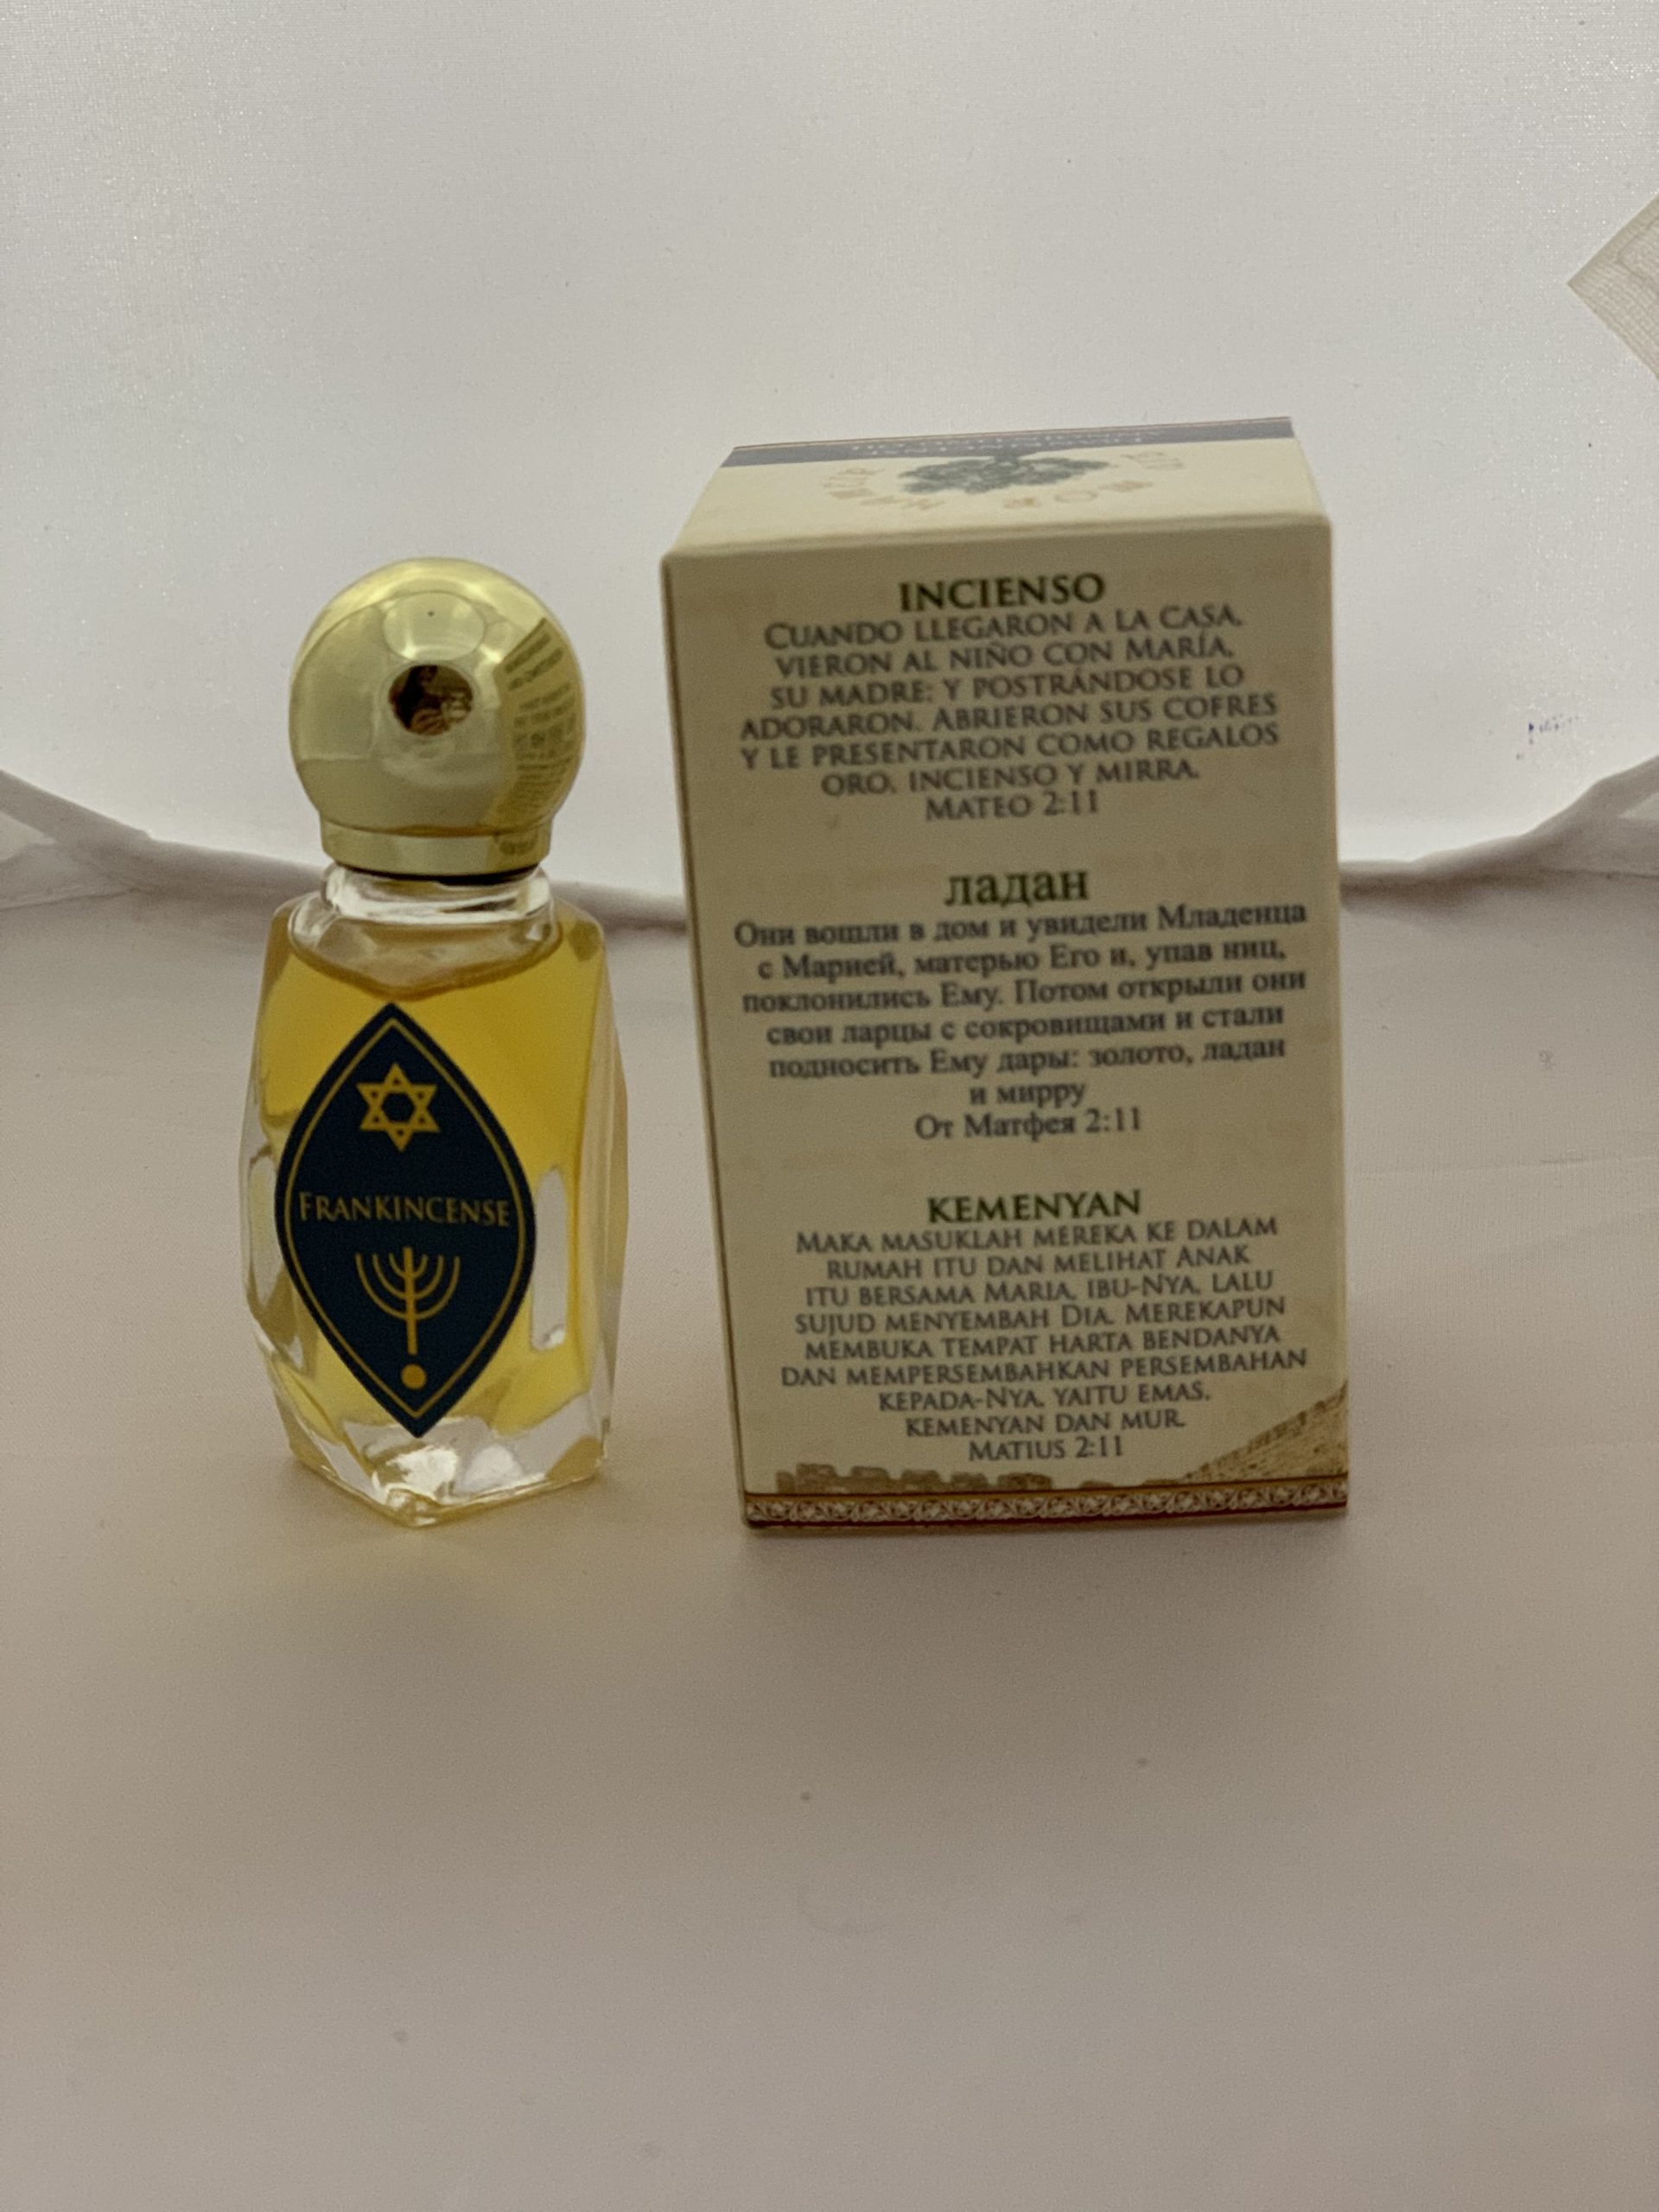 Alabaster Box Anointing Oil 1 oz